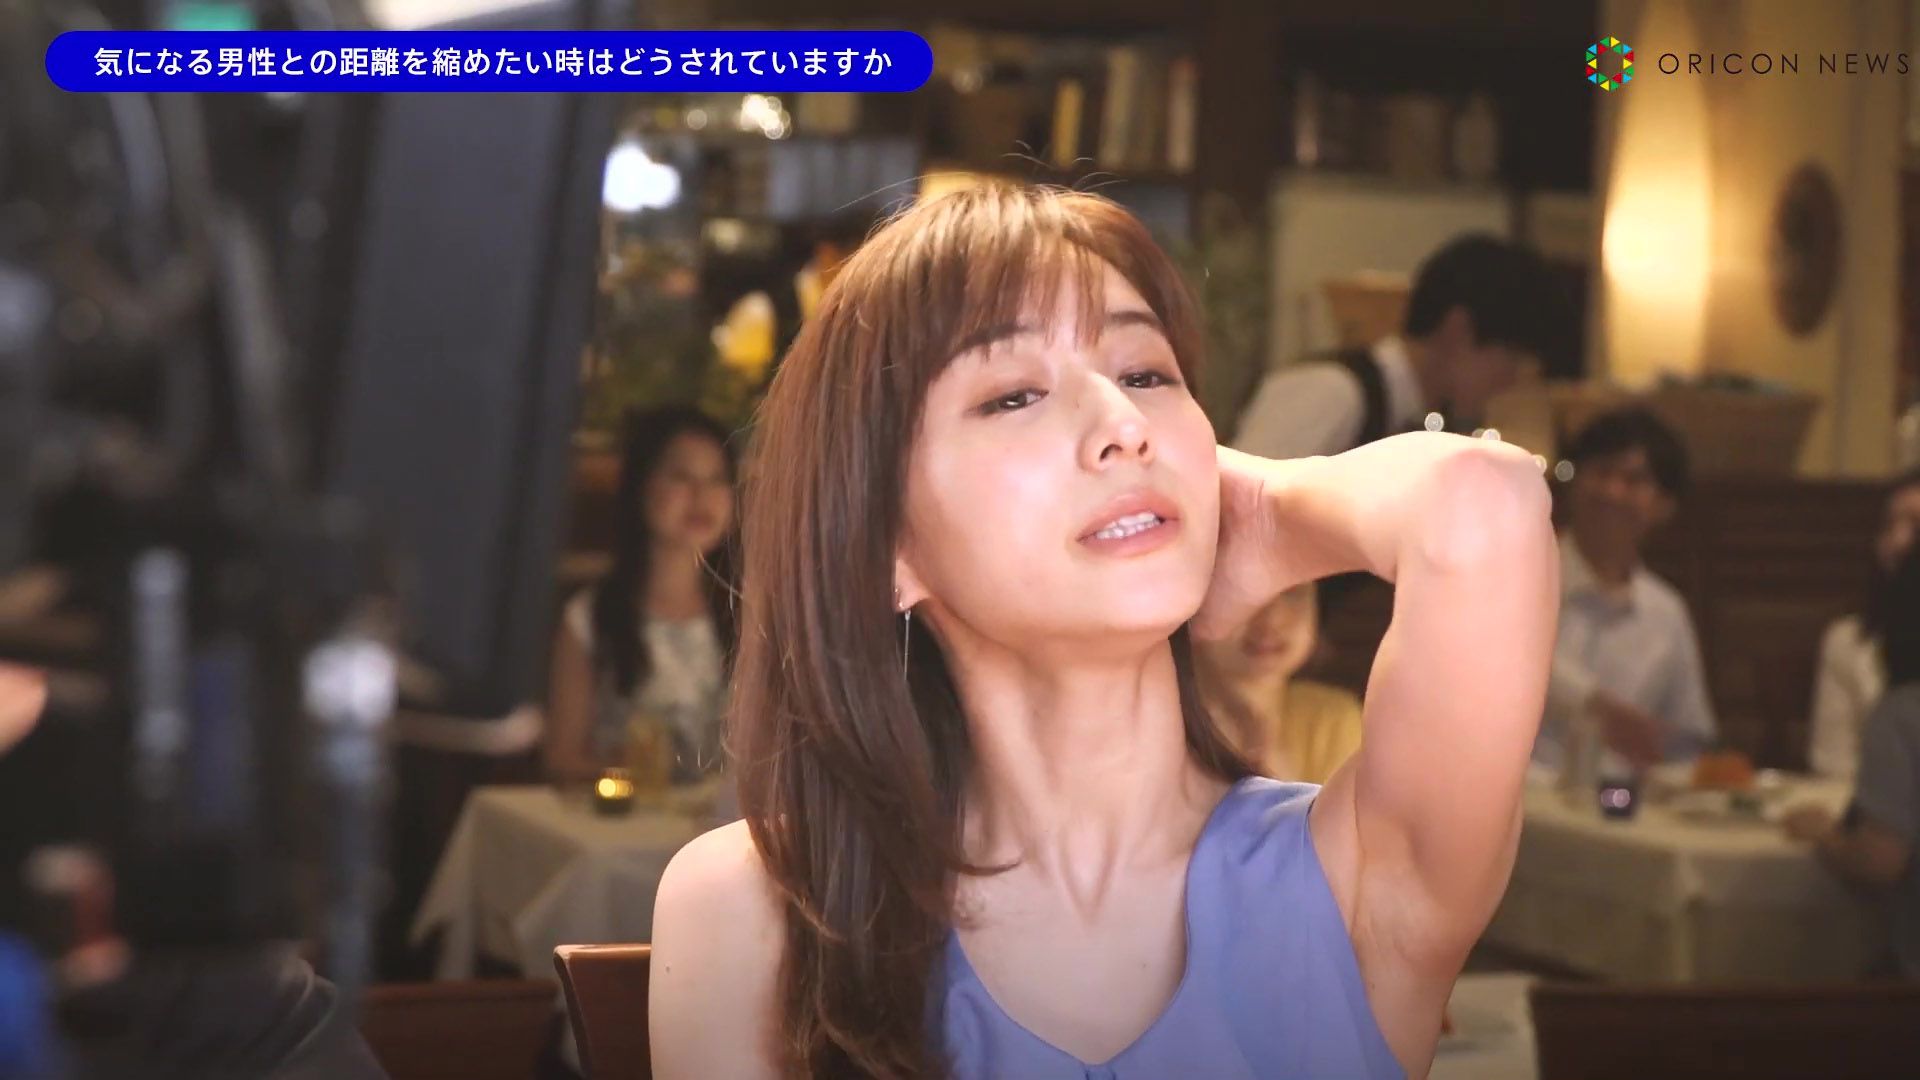 [Image] I'll show you the eroticism of Minami Tanaka 33 years old! and appeal does not stop wwwwww 2